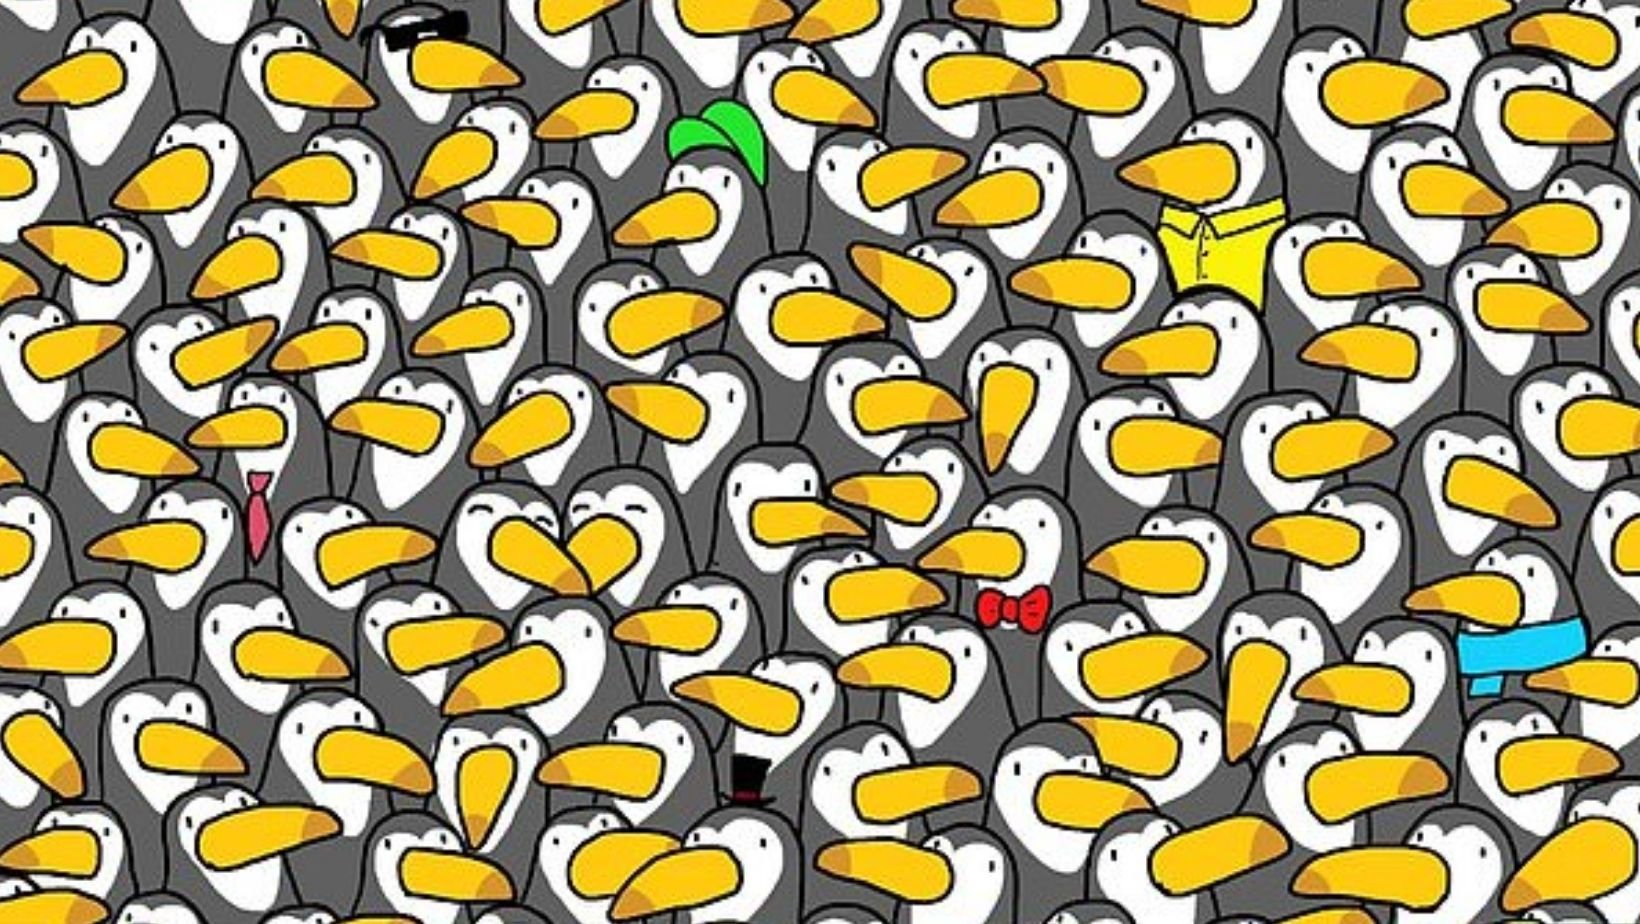 small joys thumbnail 1 10.jpg?resize=1200,630 - Can You Spot the Hidden PENGUIN Among The Toucans In 30 Seconds?